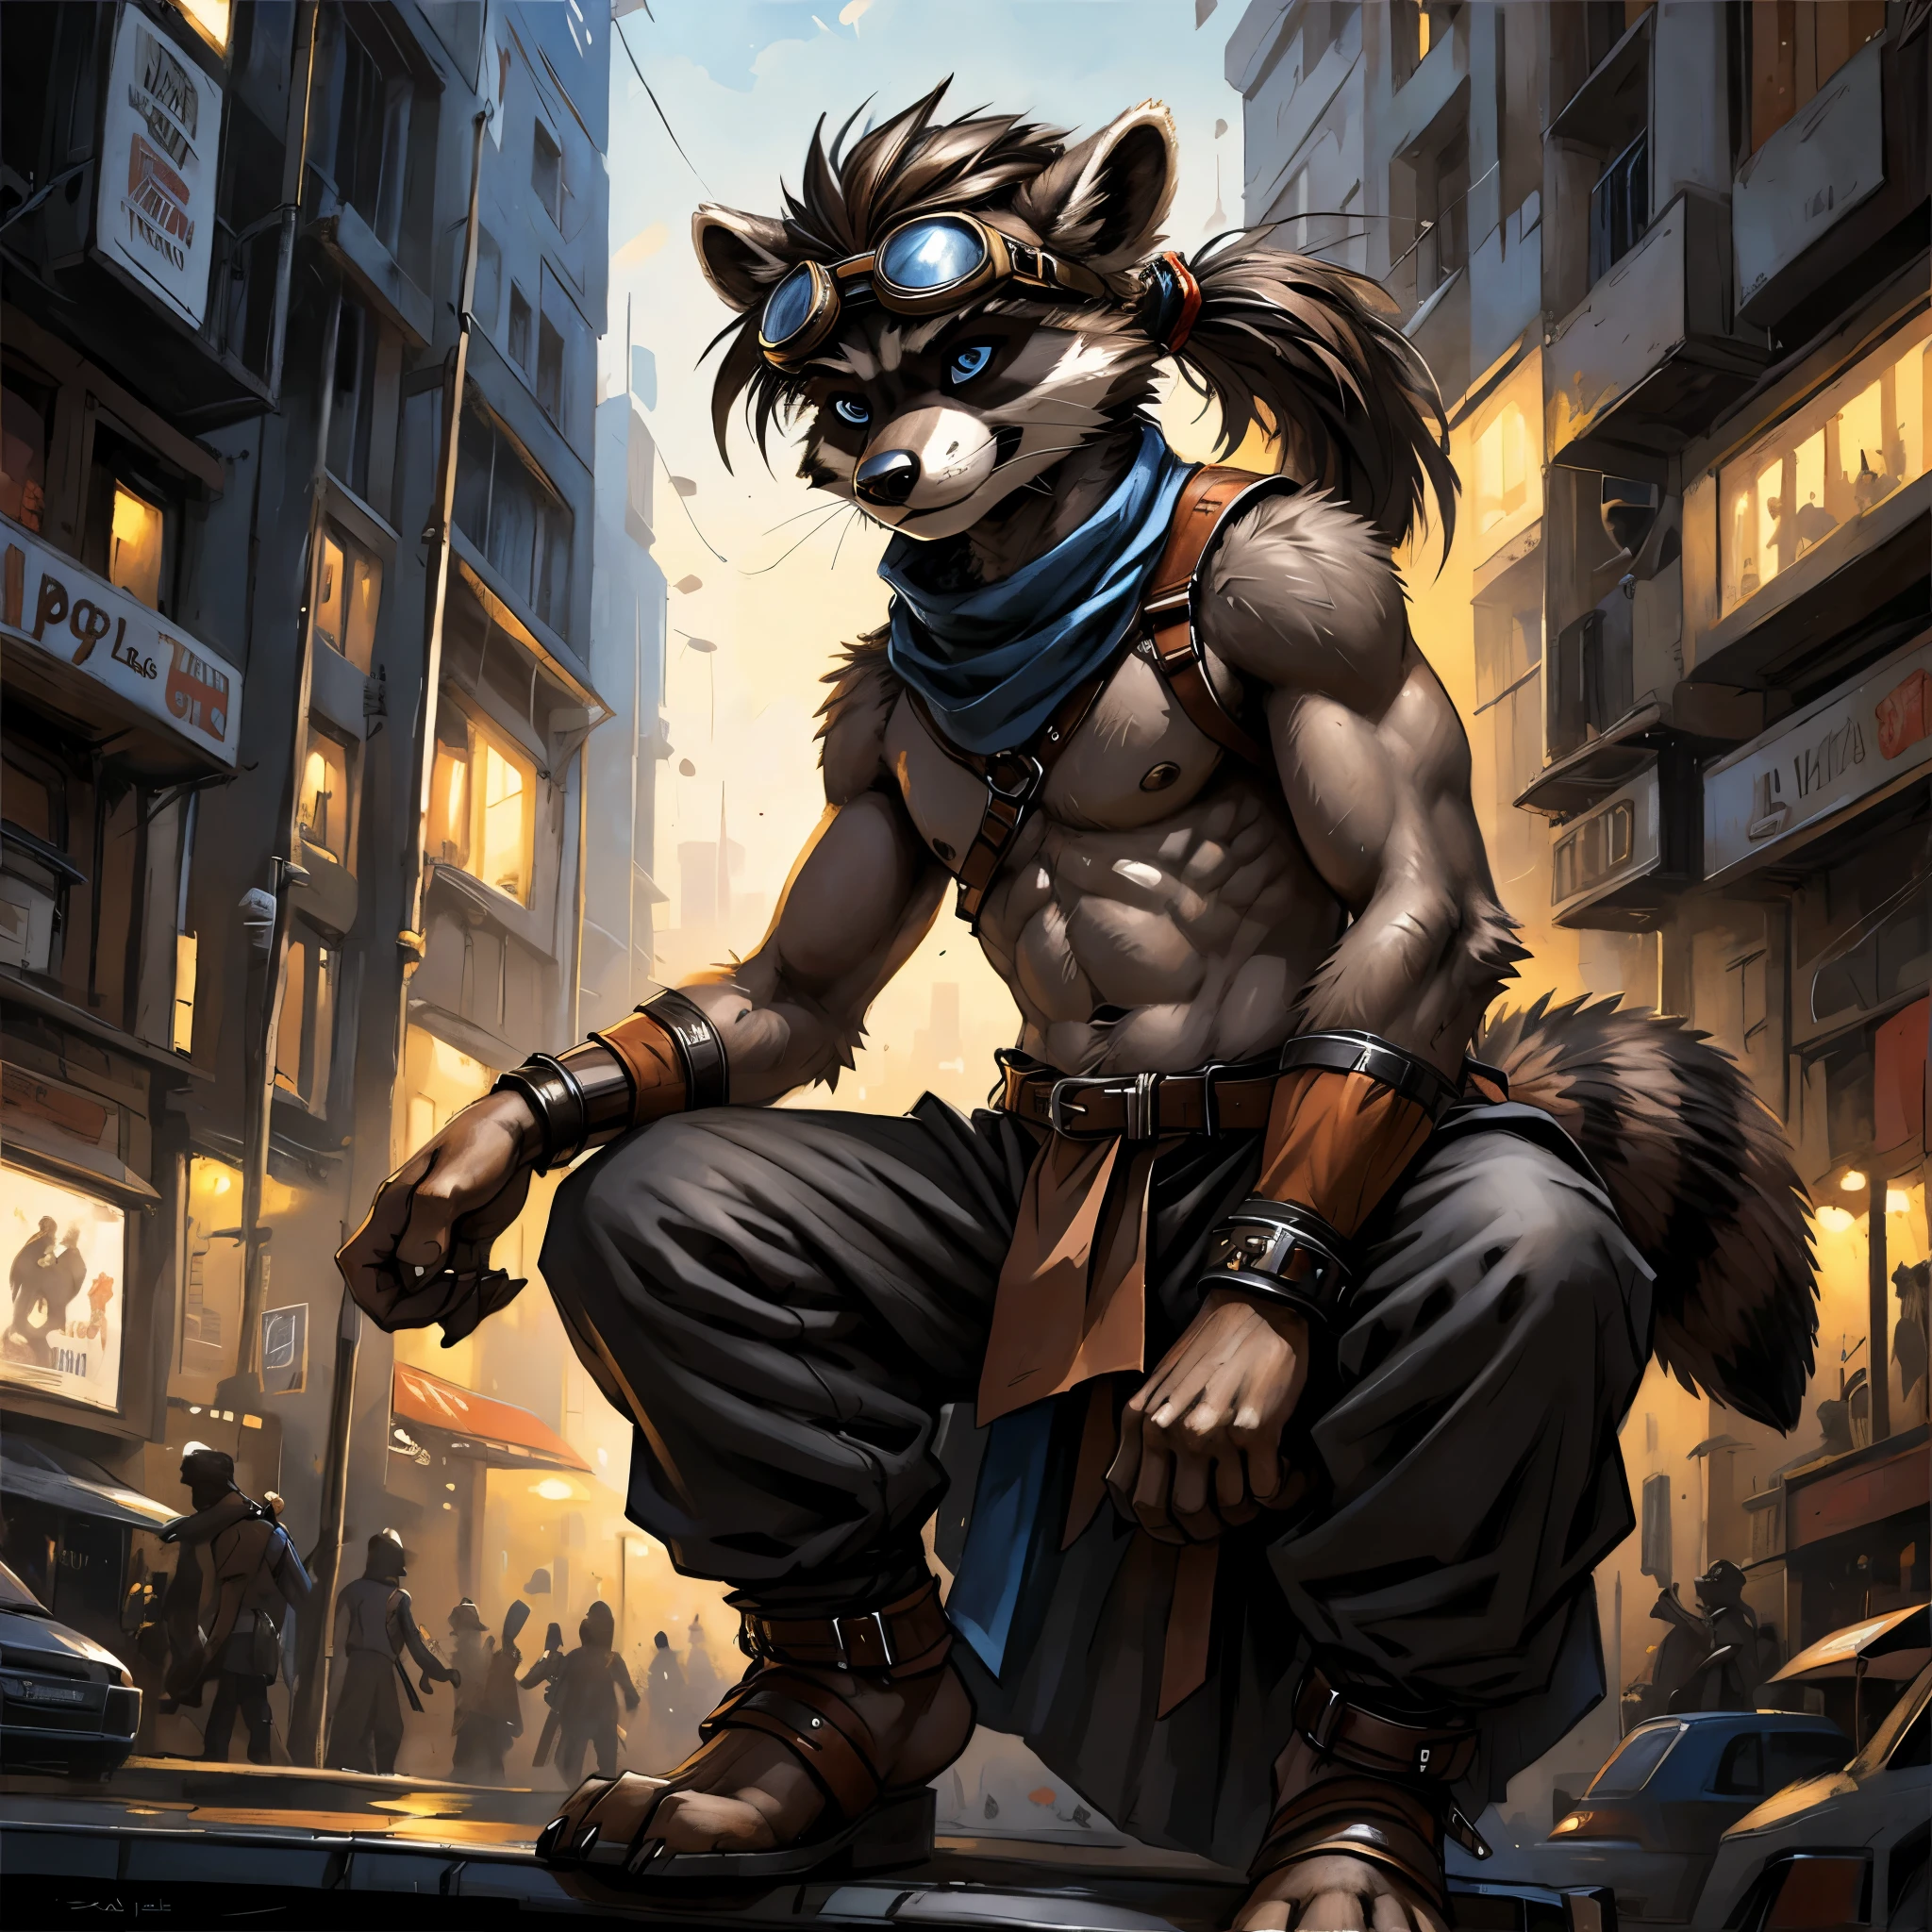 no lighting, deep shadow, dynamic angle, Solo, teen furry, furry, teen, raccoon, grey body, long brown spiked_ponytail, Detailed body fur, long blue scarf, leather_harness, black_loincloth, goggles, masterpiece, gray body, Detailed face, big eyebrows, blue eyes, detailed eyes, No muscles, Detailed hands, Flat body, Skinny, Detailed paws, metal cuffs on wrists, metal cuffs on ankles, black baggy pants, no shirt, crowded city, night, no underwear, sitting, art by kenket